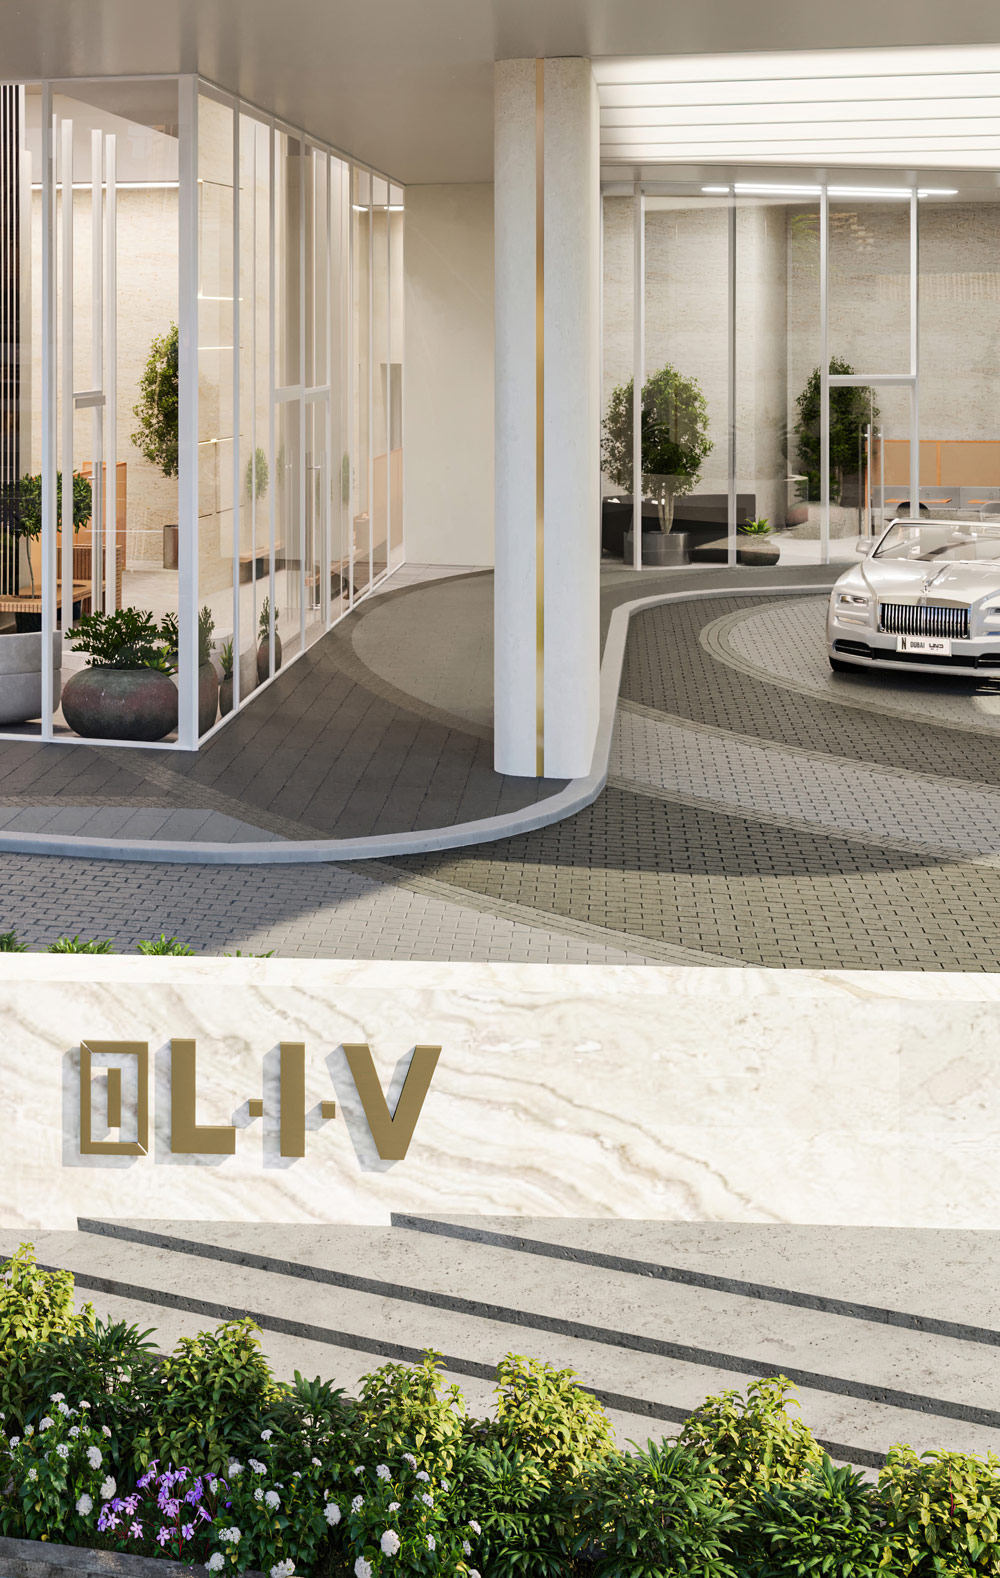 LIV LUX Waterfront Apartments for Sale in Dubai Marina